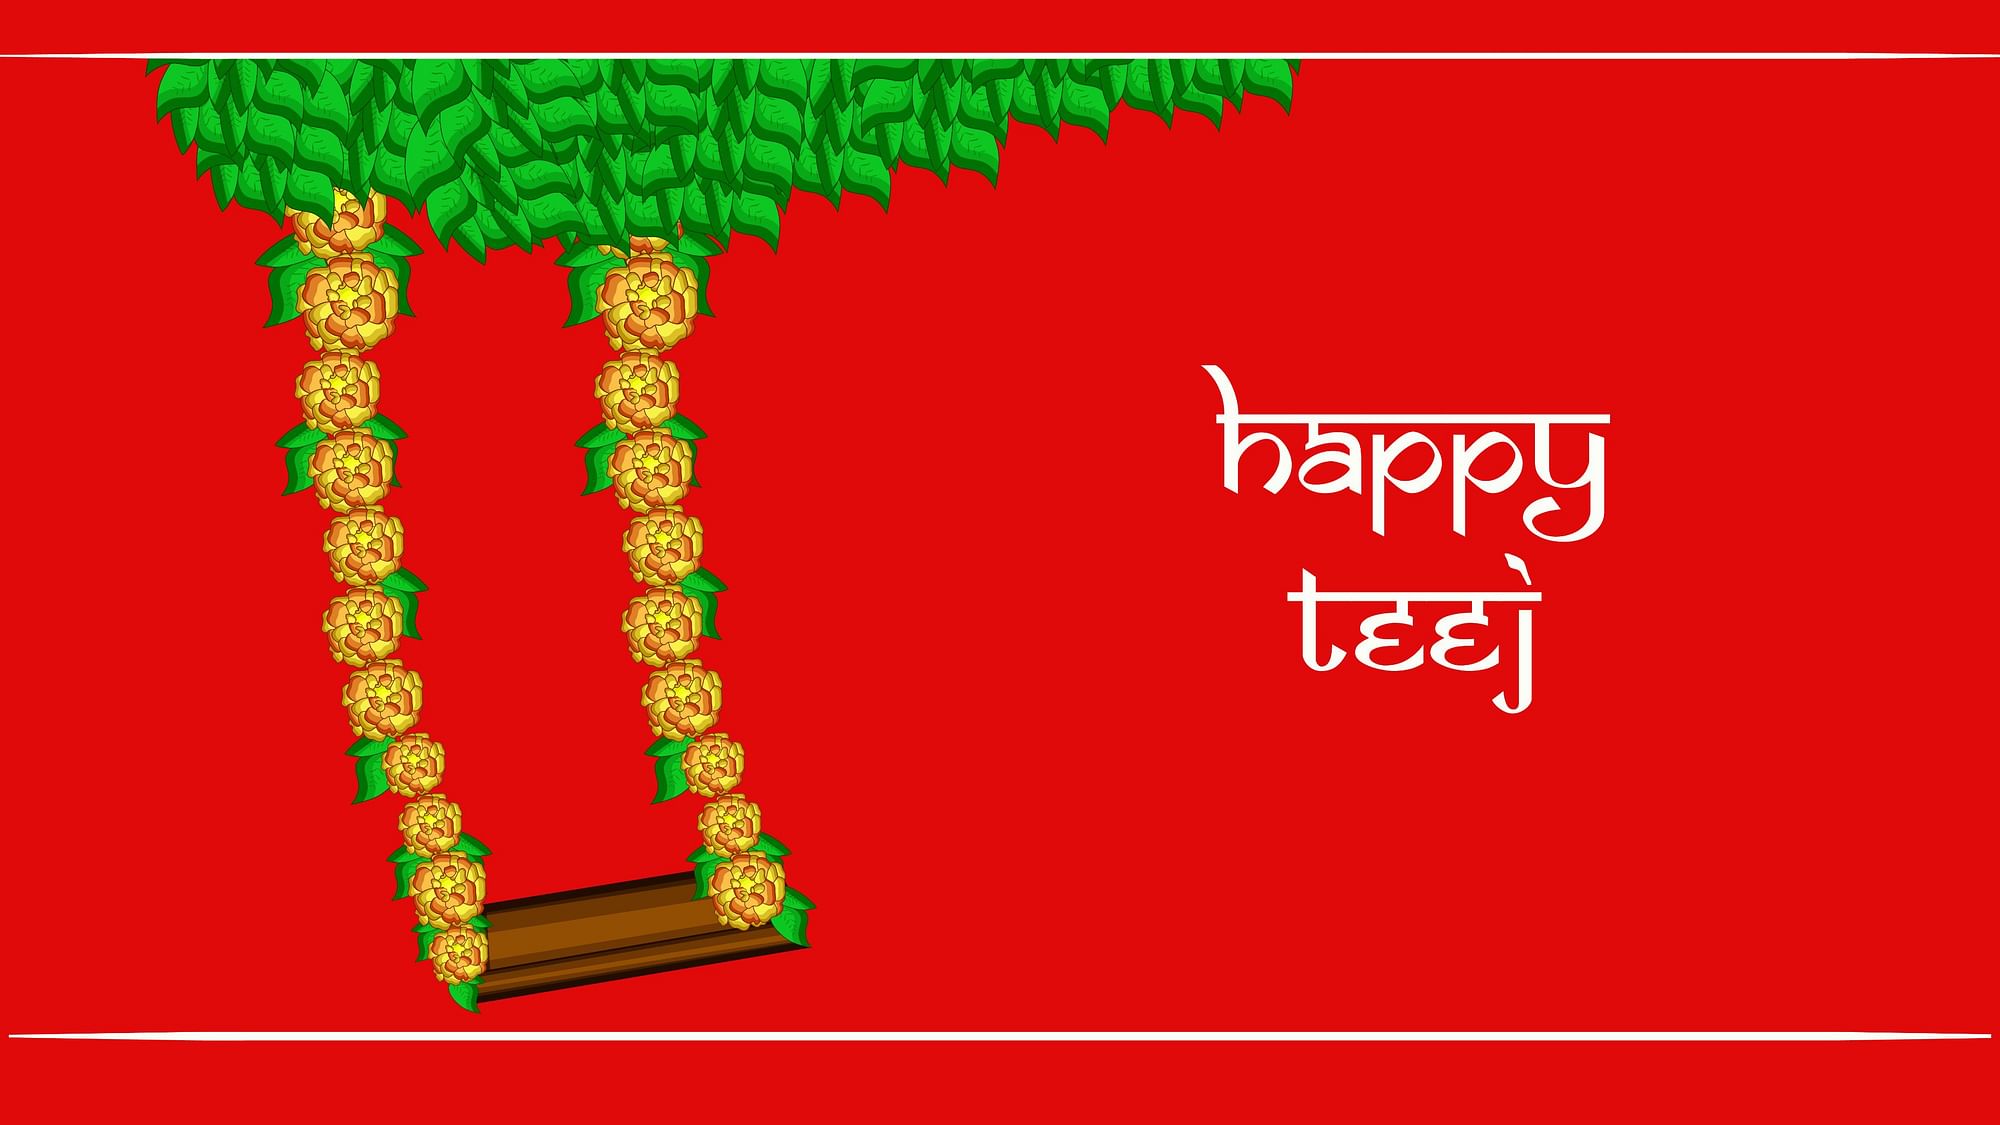 Happy Hariyali Teej 2019 Wishes, SMS, Images and Quotes: Married women keep fasts for their husband’s long and healthy life on Hariyali Teej.